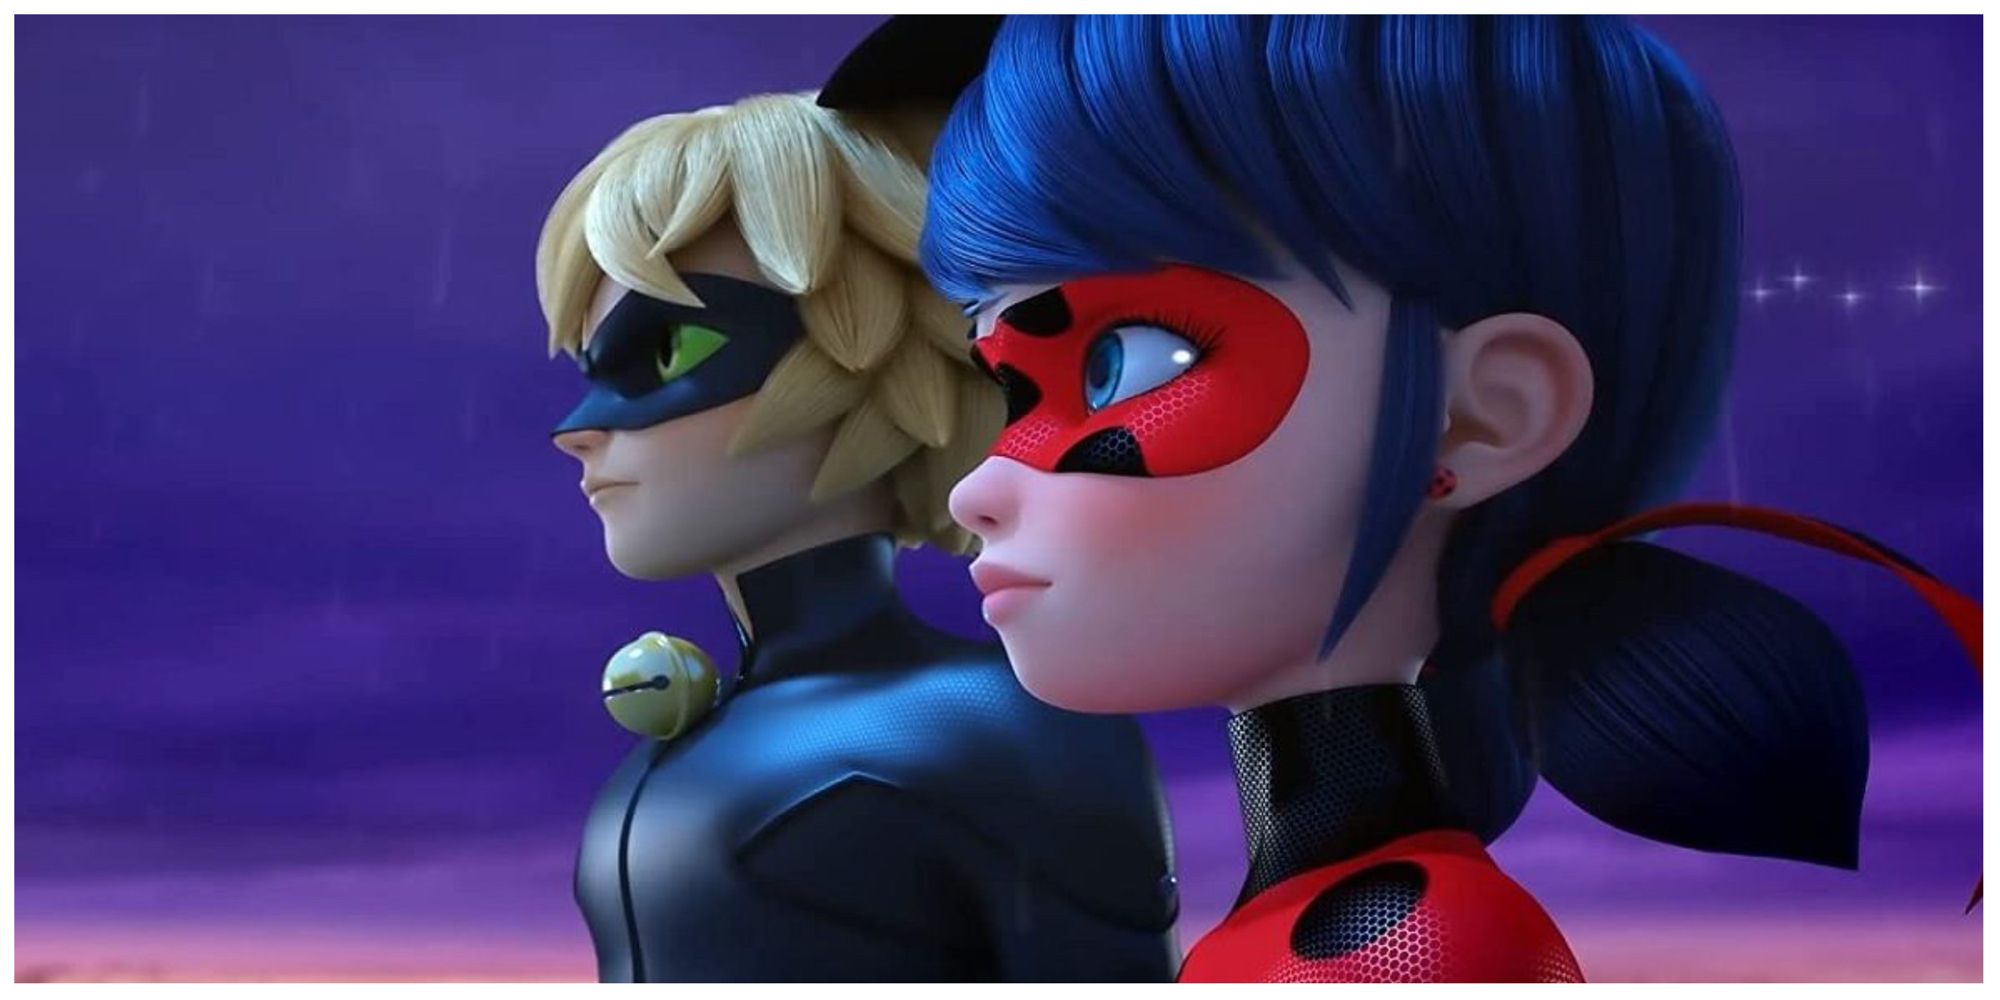 Marinette and Adrien as Cat Noir and Ladybug in Miraculous 